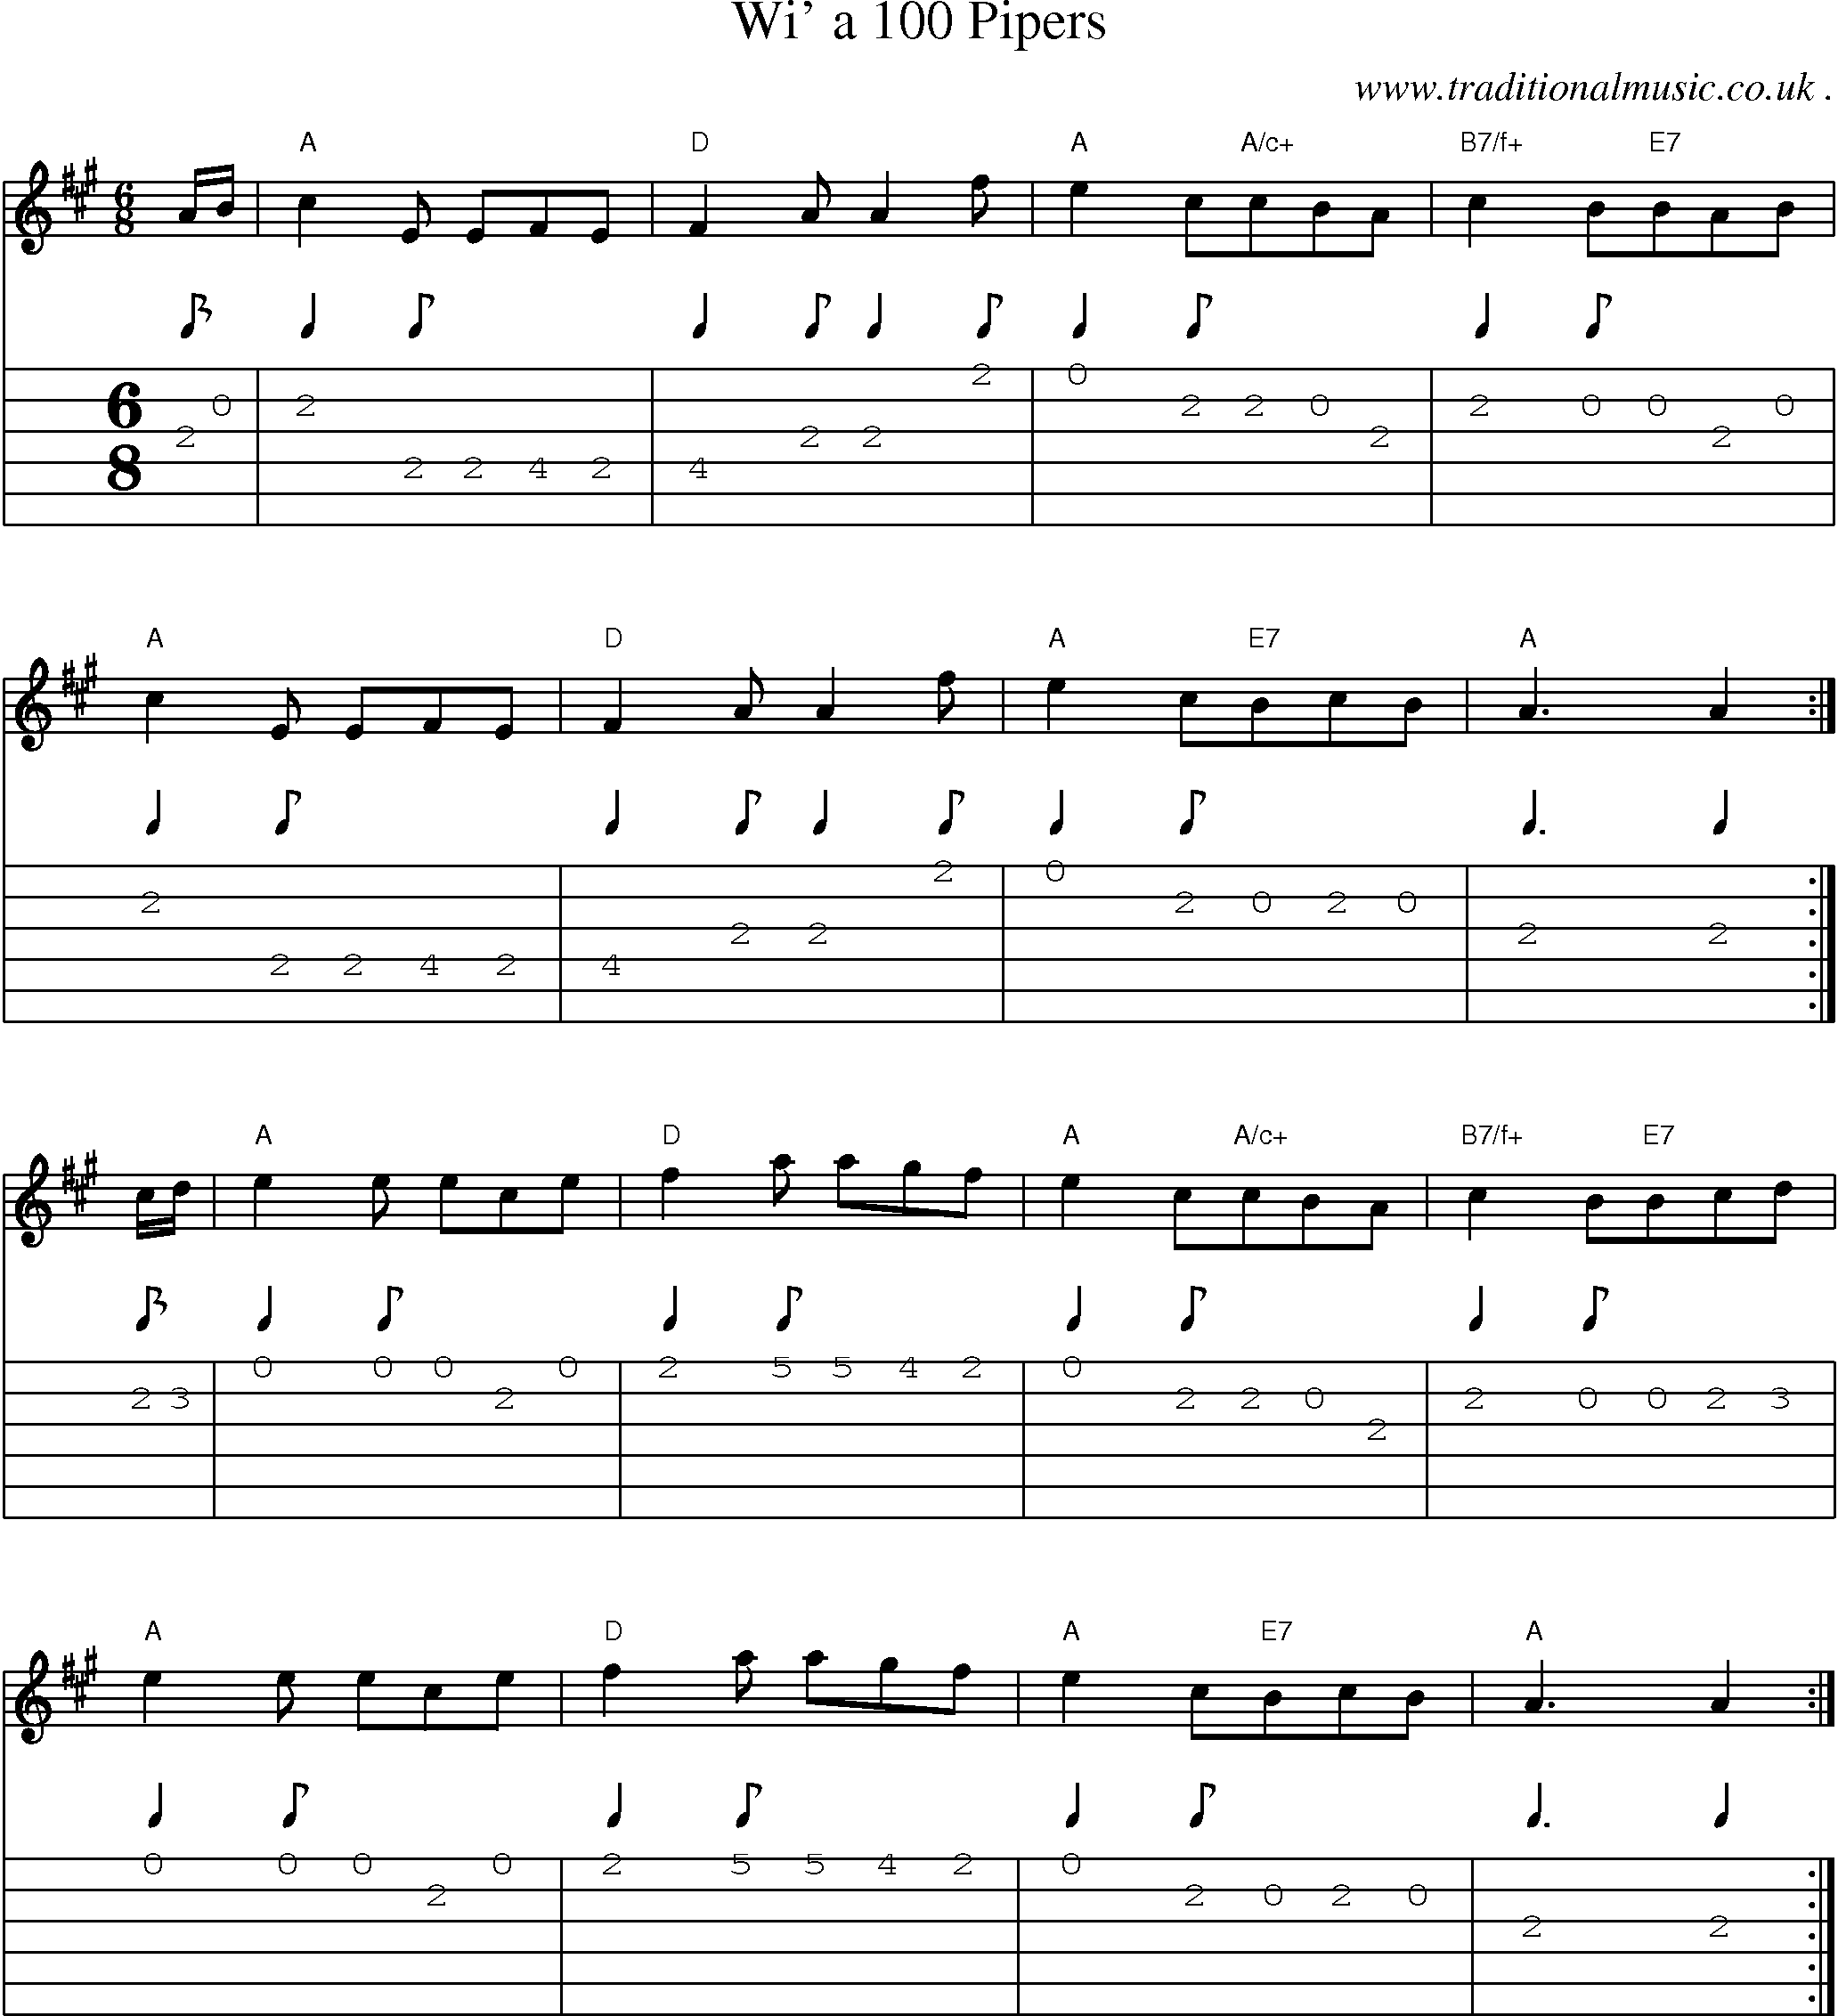 Sheet-Music and Guitar Tabs for Wi A 100 Pipers